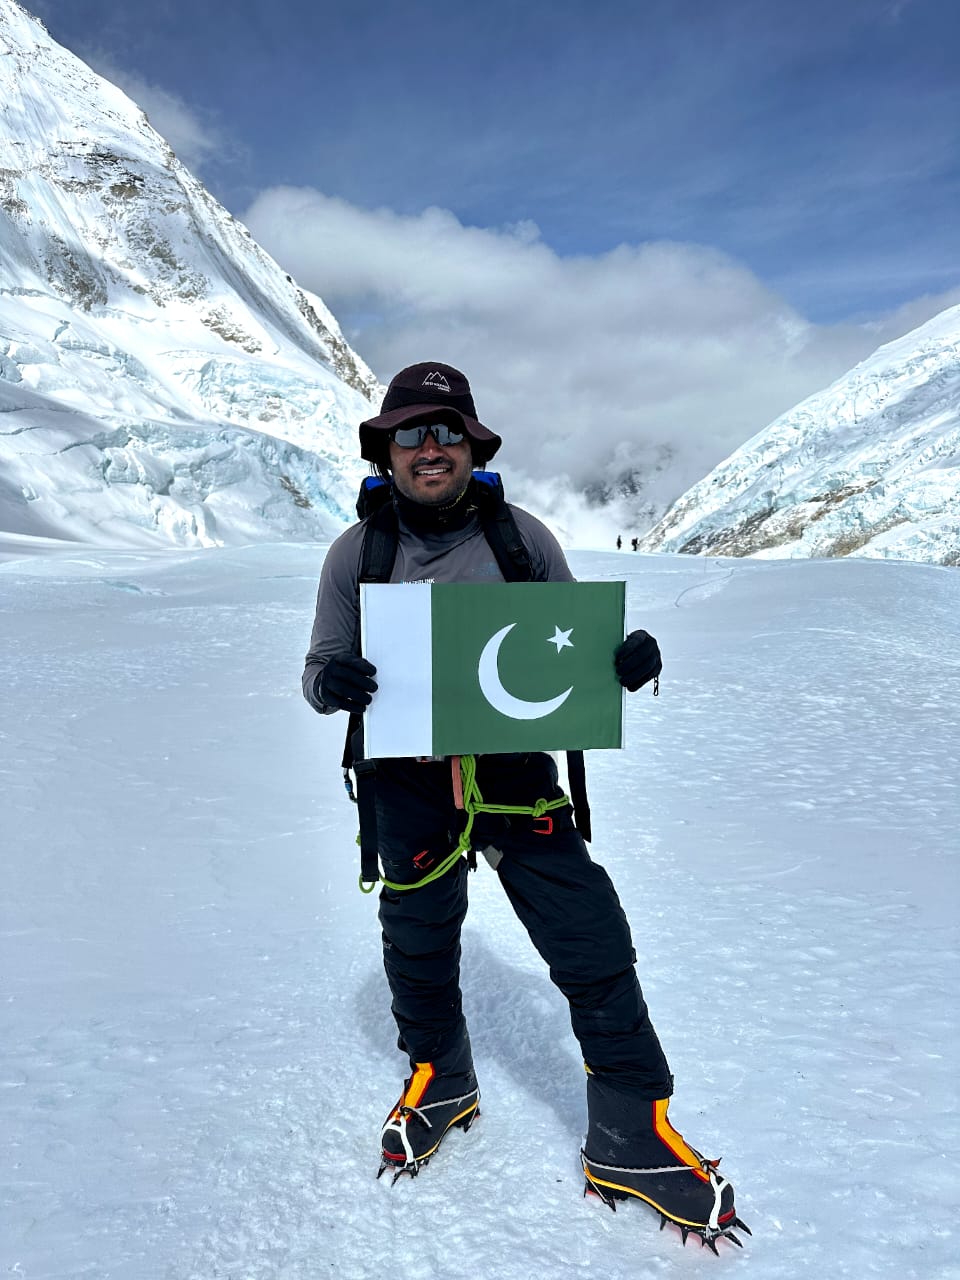 IoBM's Student Asad Ali Memon successfully reached the summit of Mount Everest